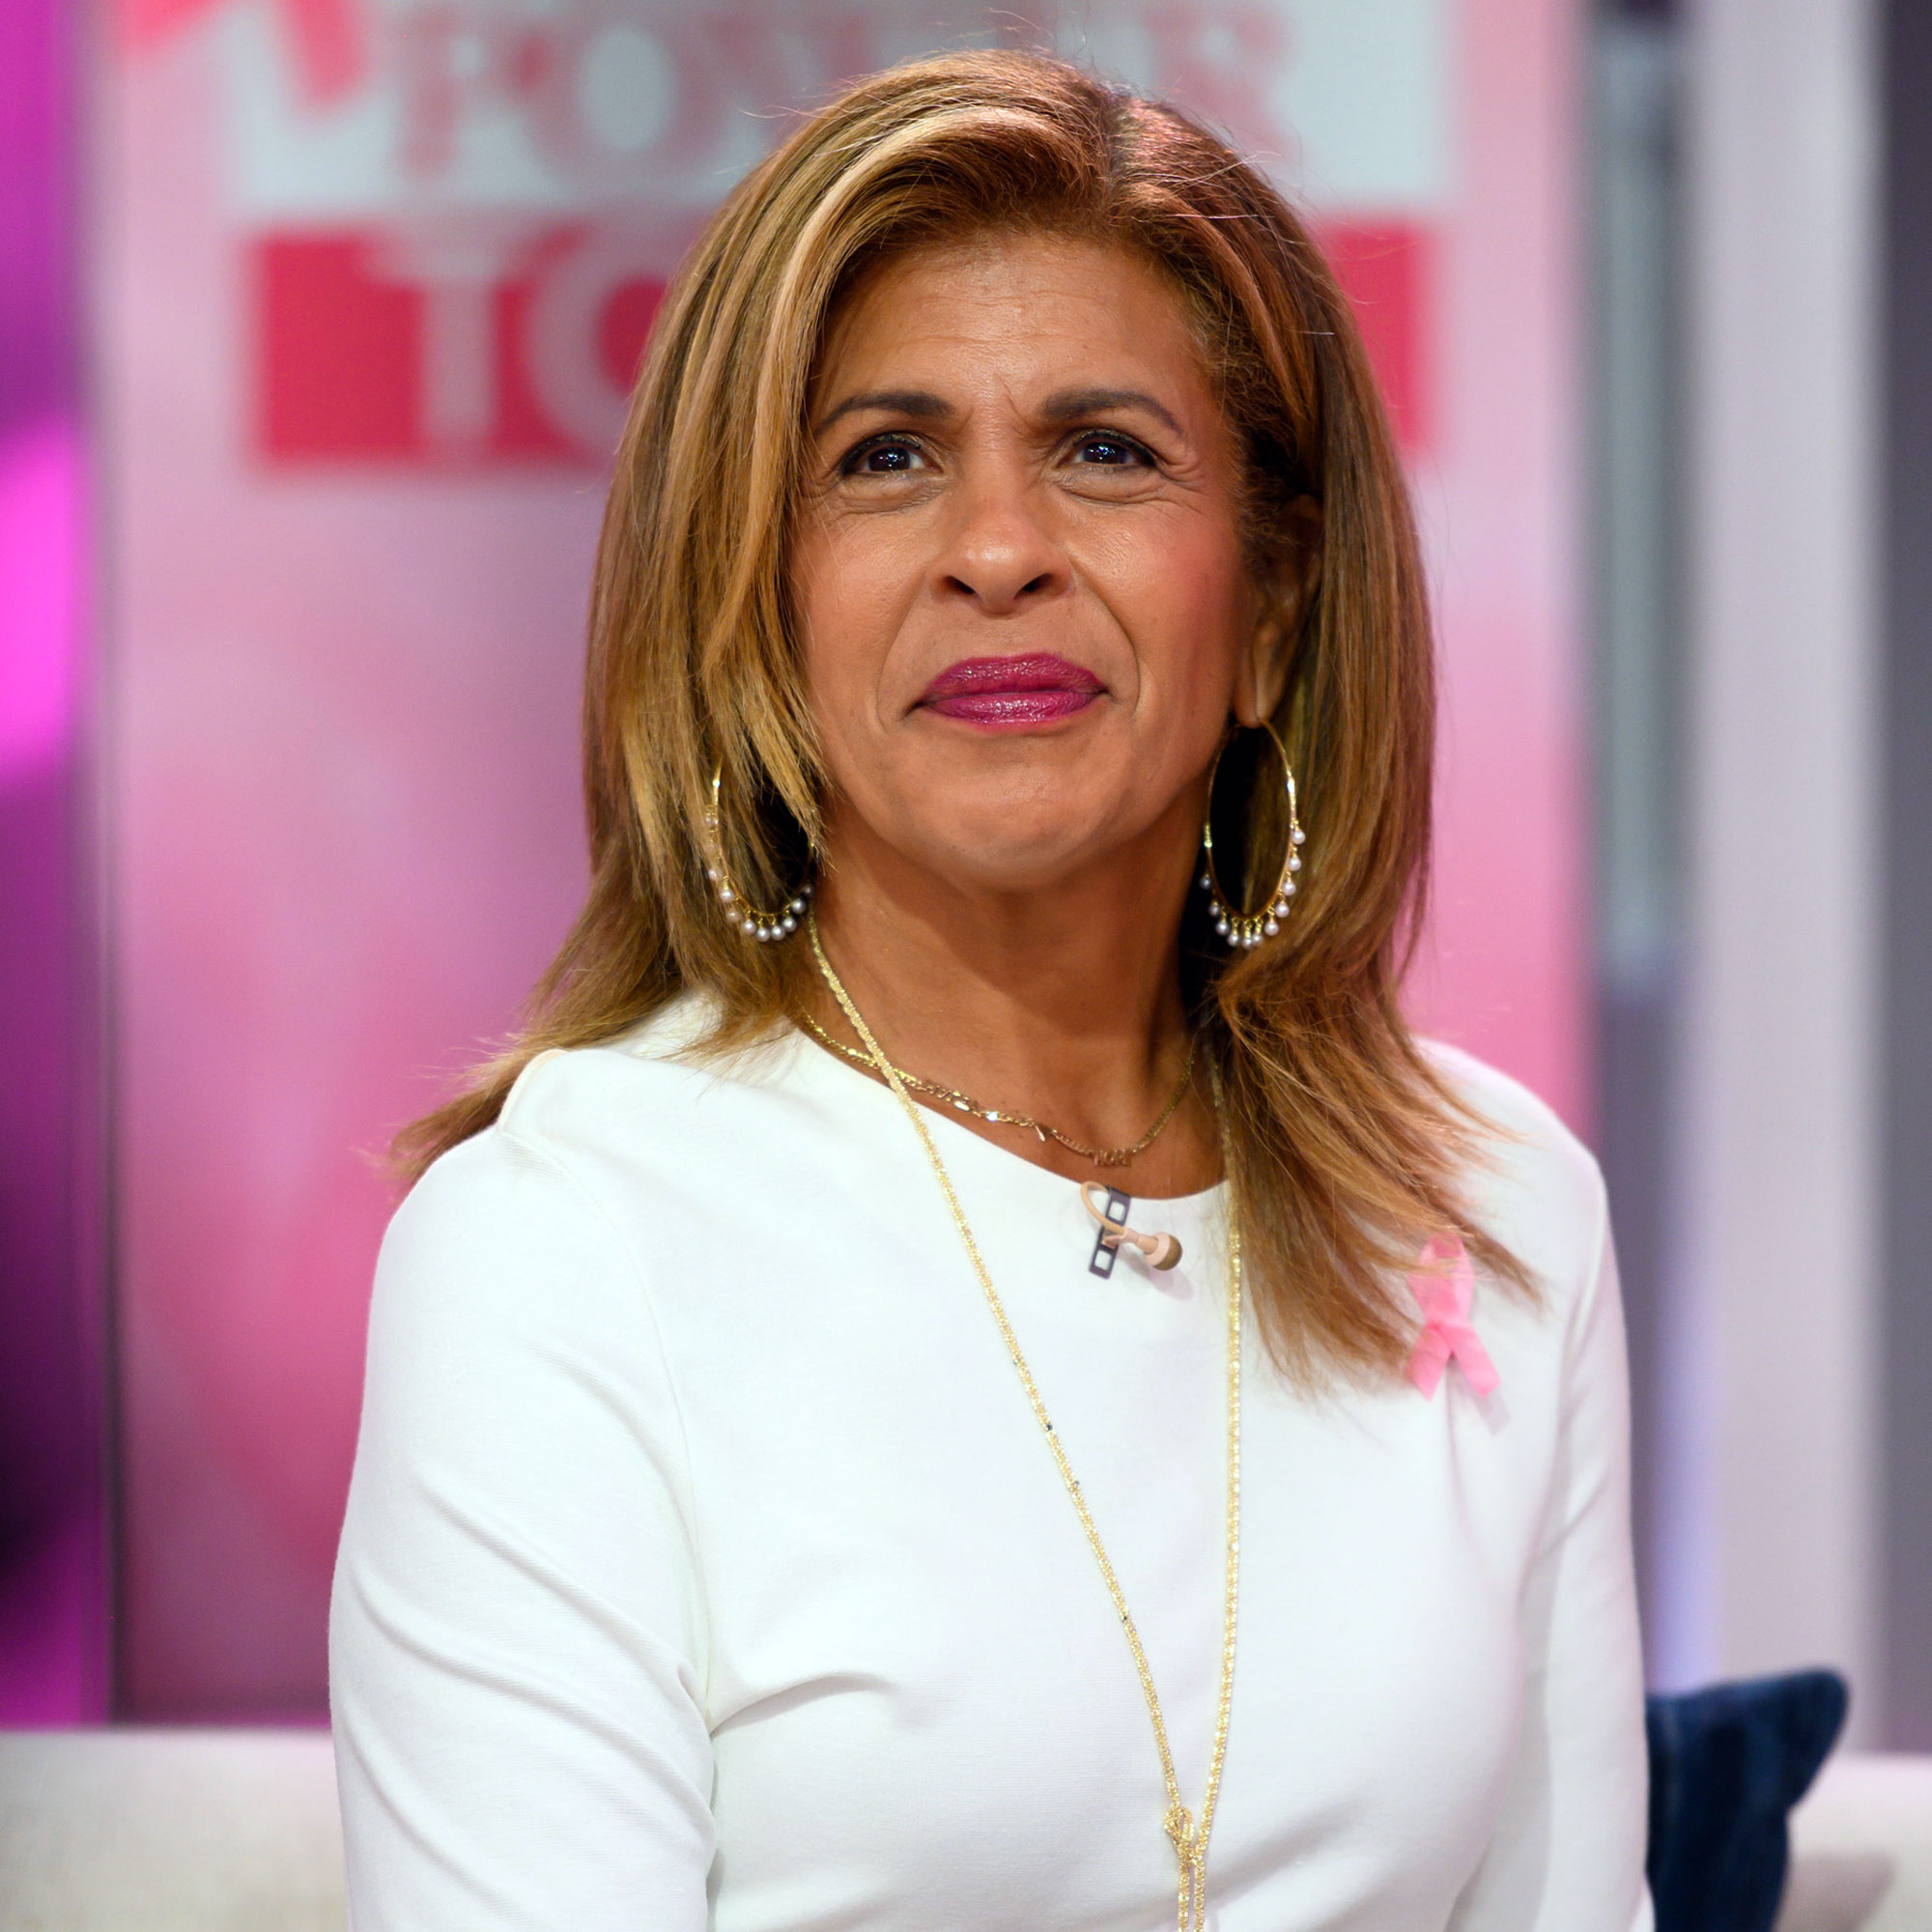 Andy analyzes Hoda's bracelets | What do you think of Hoda Kotb's jewelry?  Andy Cohen has some ideas. 😆 | By TODAY with Hoda & Jenna | I mean this  actually, I